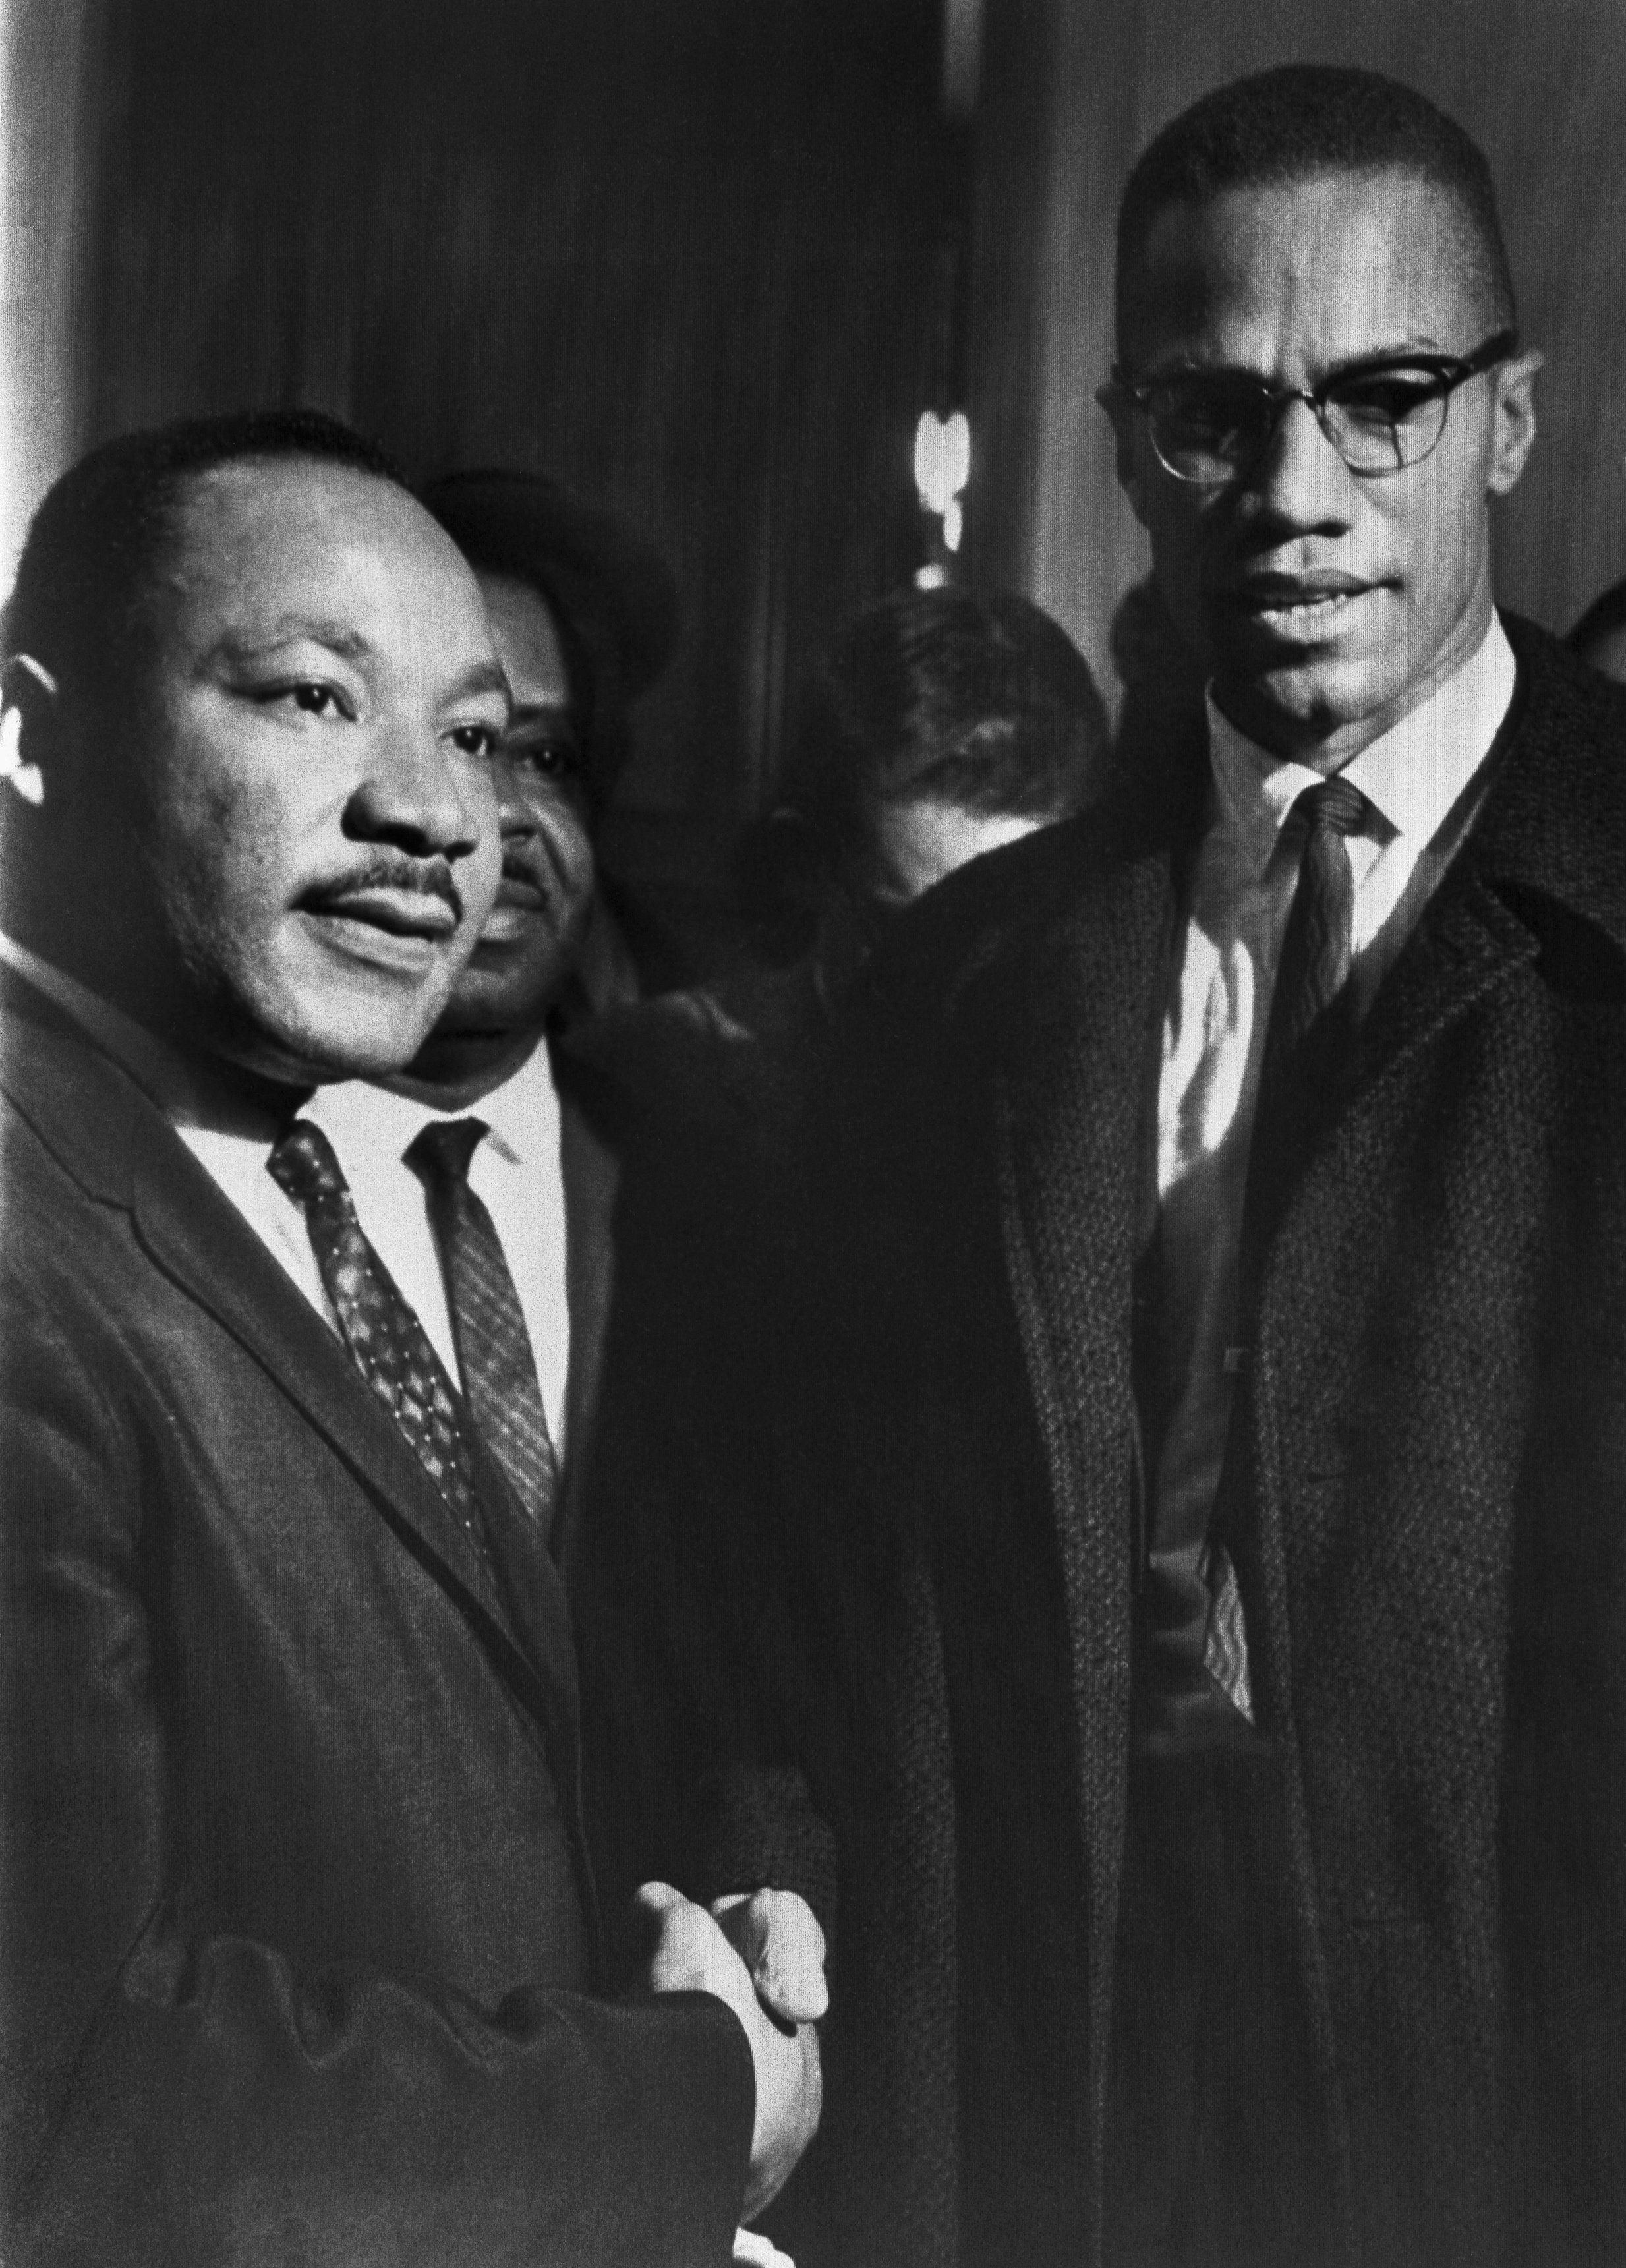 The brief, and only, meeting between Malcolm X (1925-1965) and Martin Luther King (1929-1968), in the halls of the US Capitol, attending a Senate hearing on the Civil Rights Act, Washington DC, 26th March 1964. | Source: Getty Images